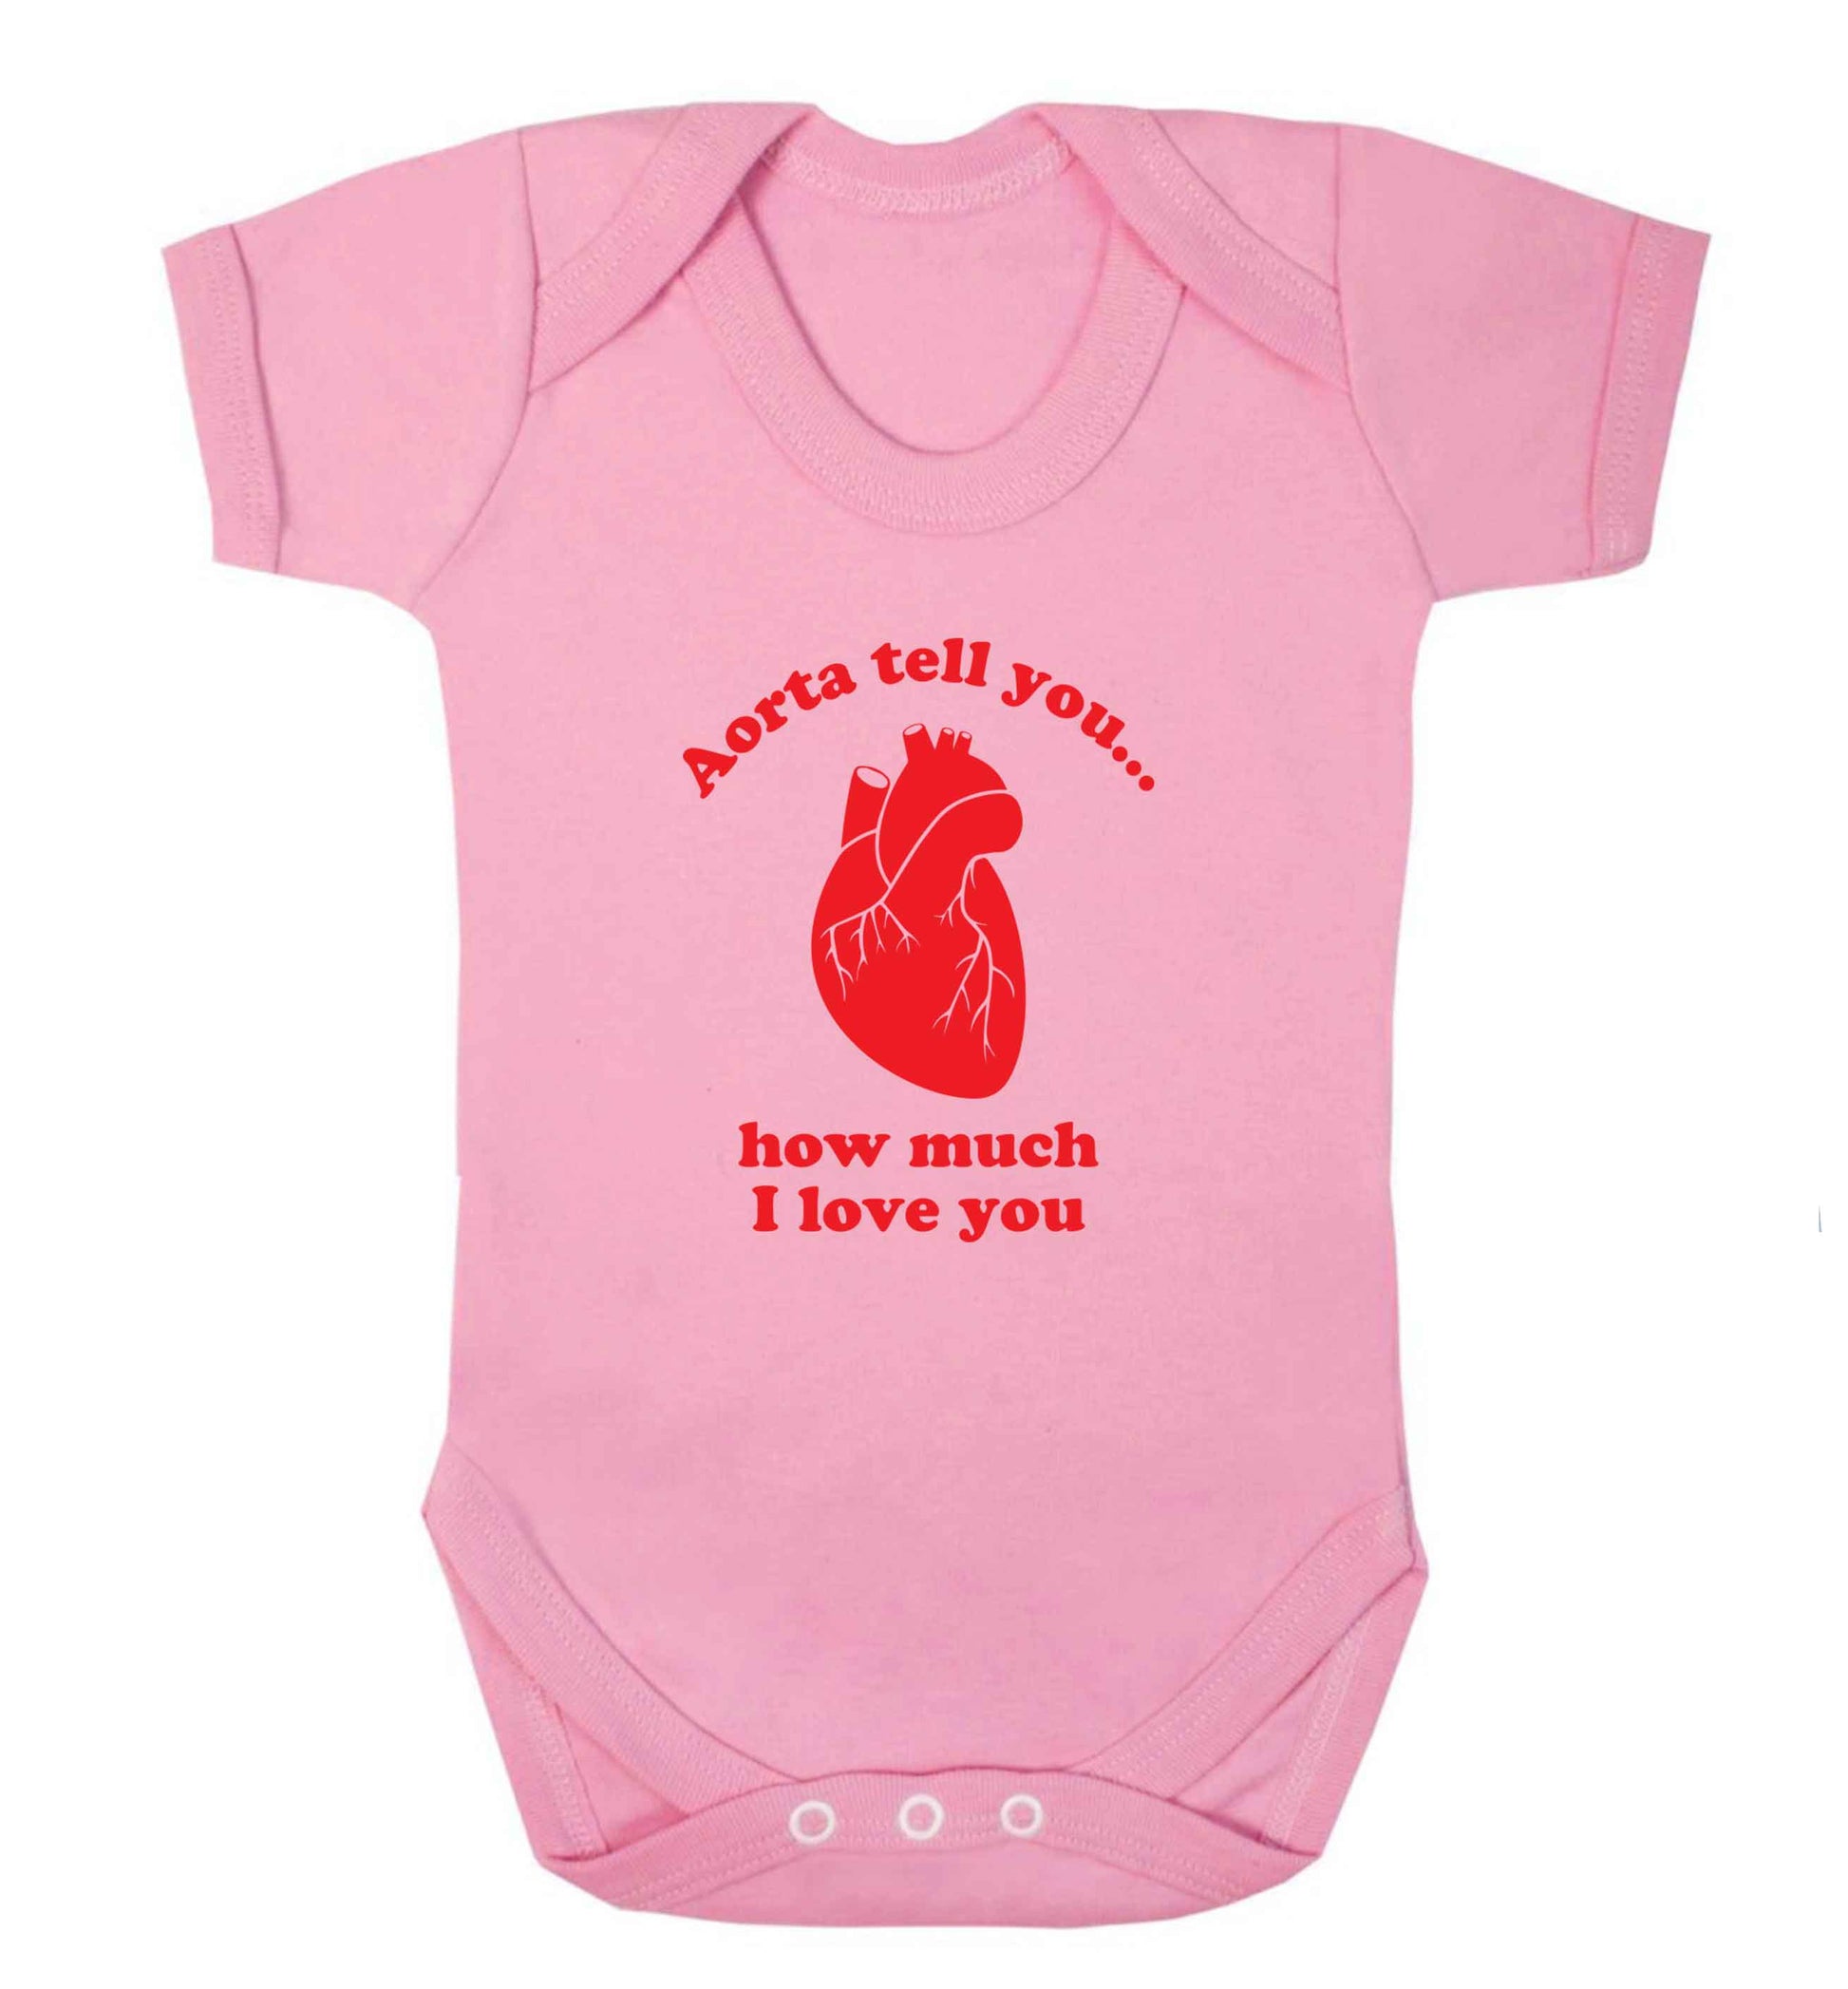 Aorta tell you how much I love you baby vest pale pink 18-24 months